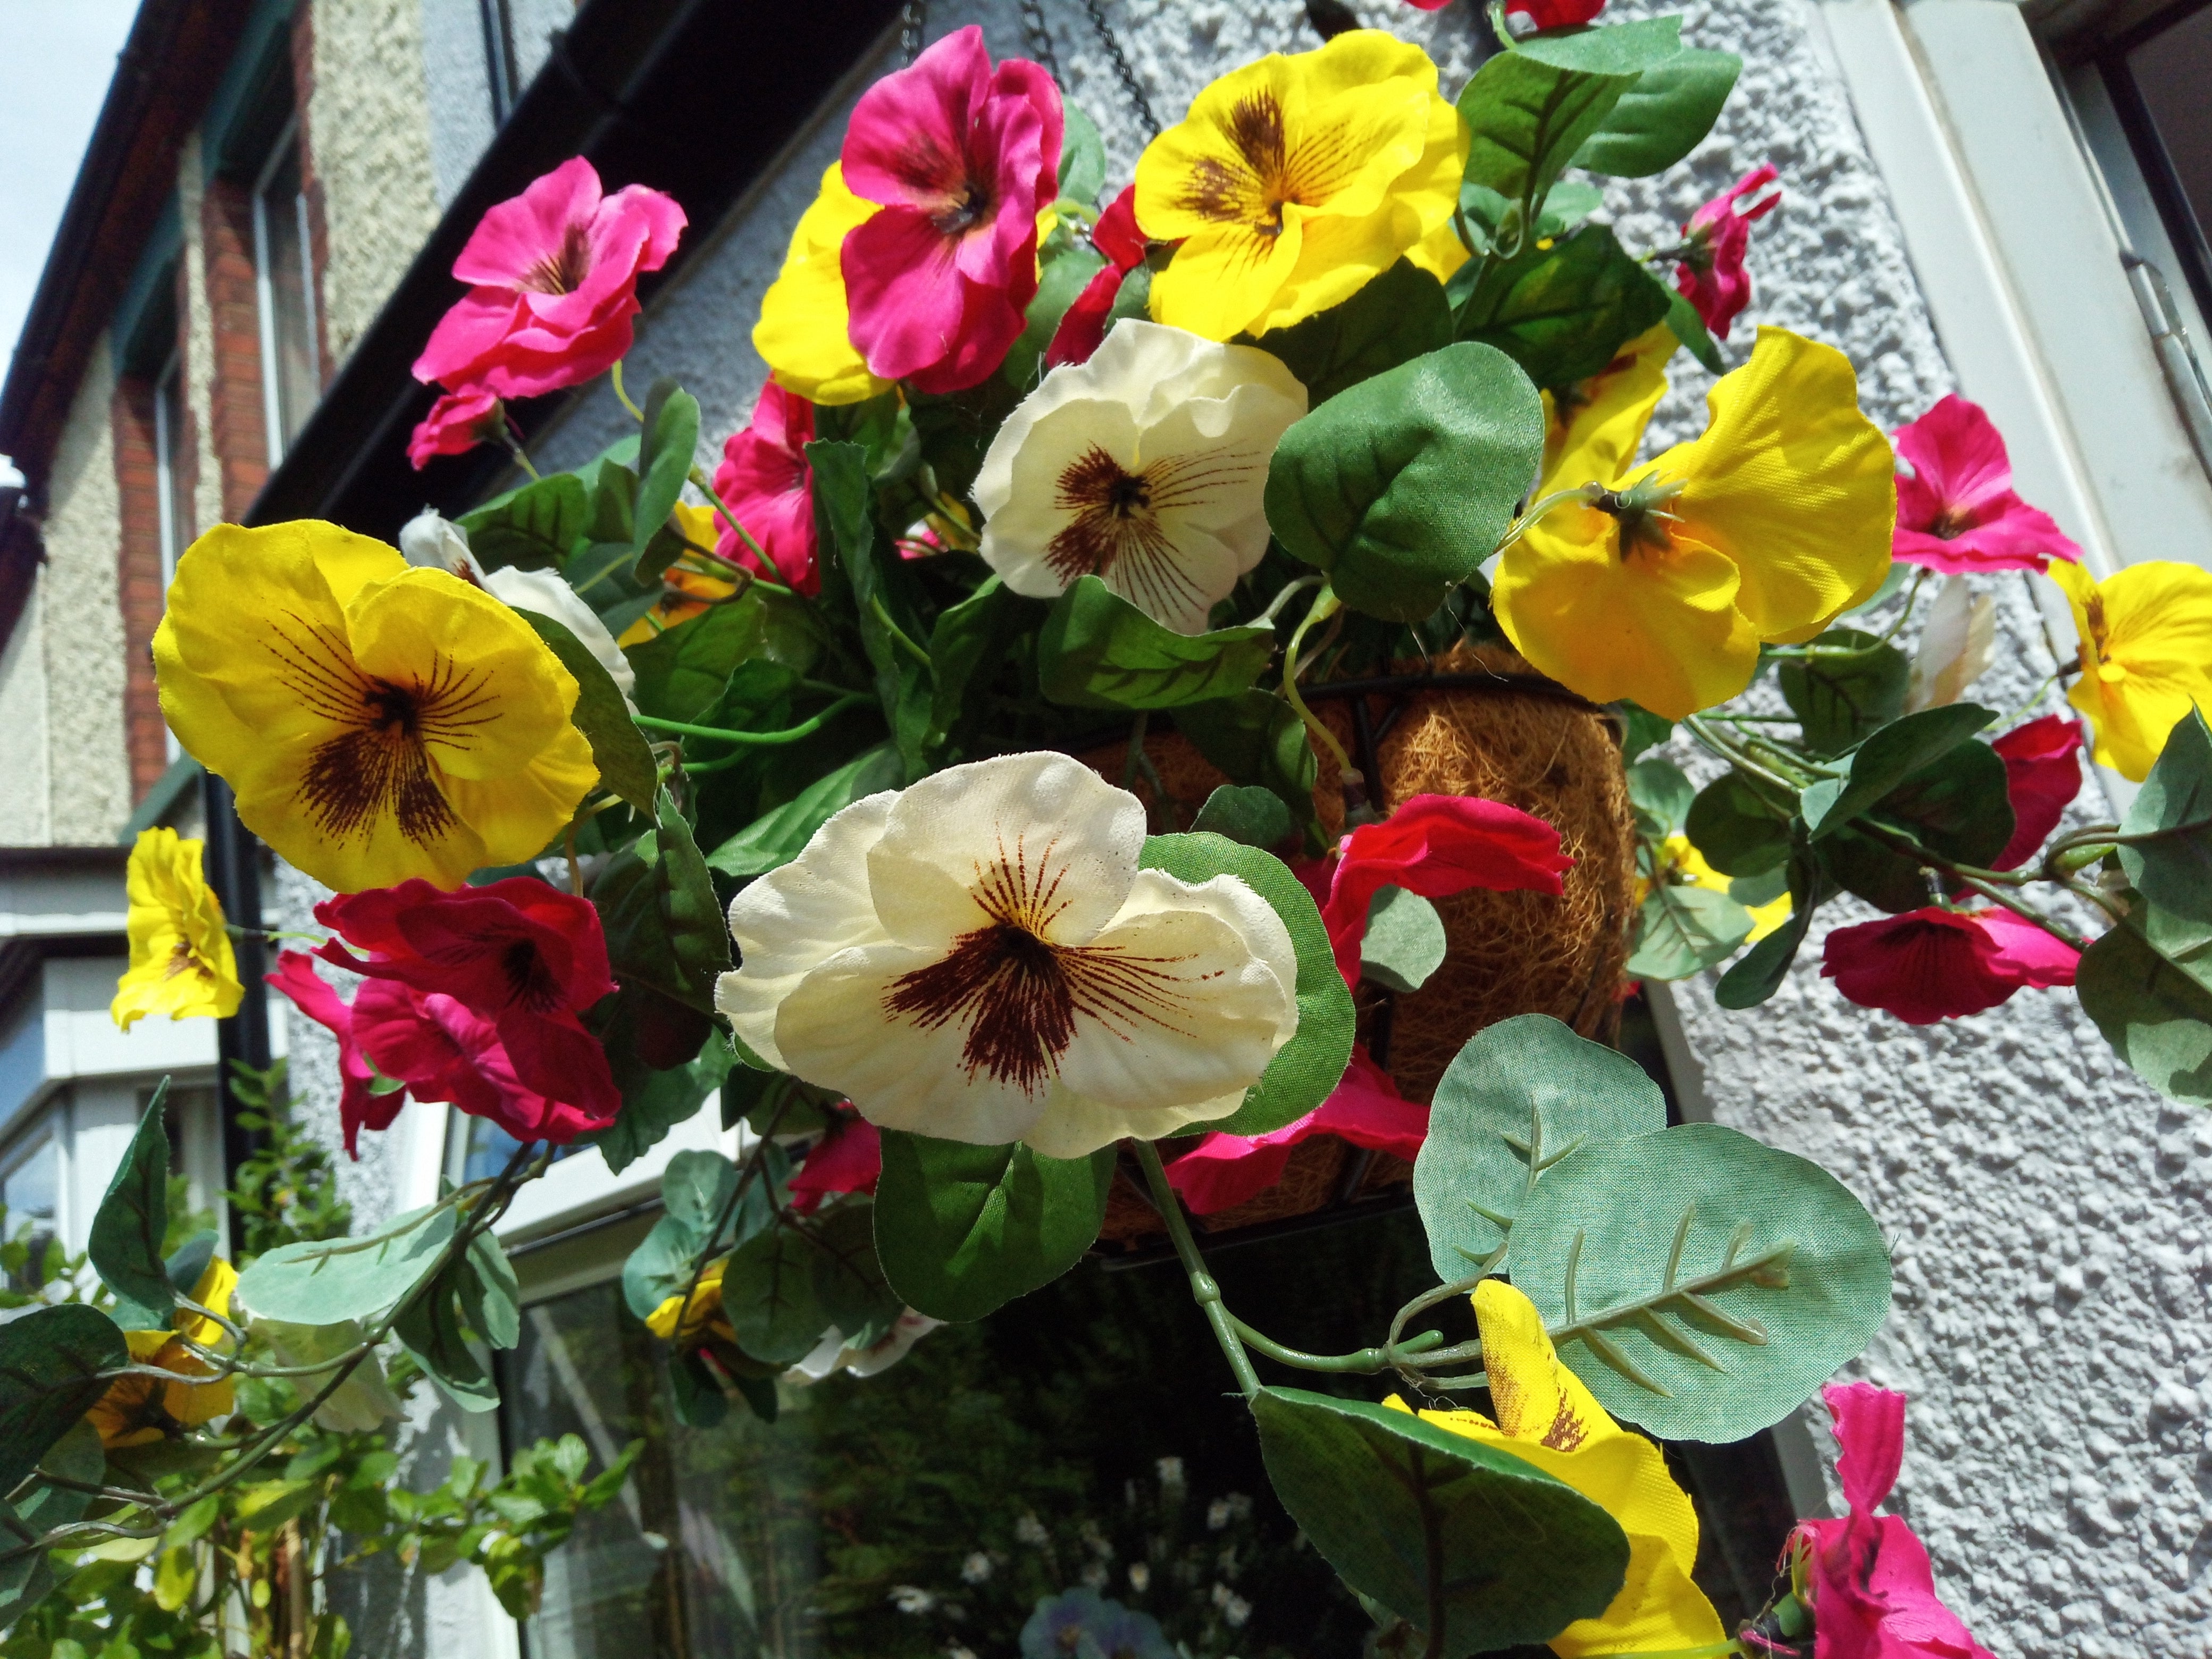 Colorful flowers in a hanging basket outside a house.